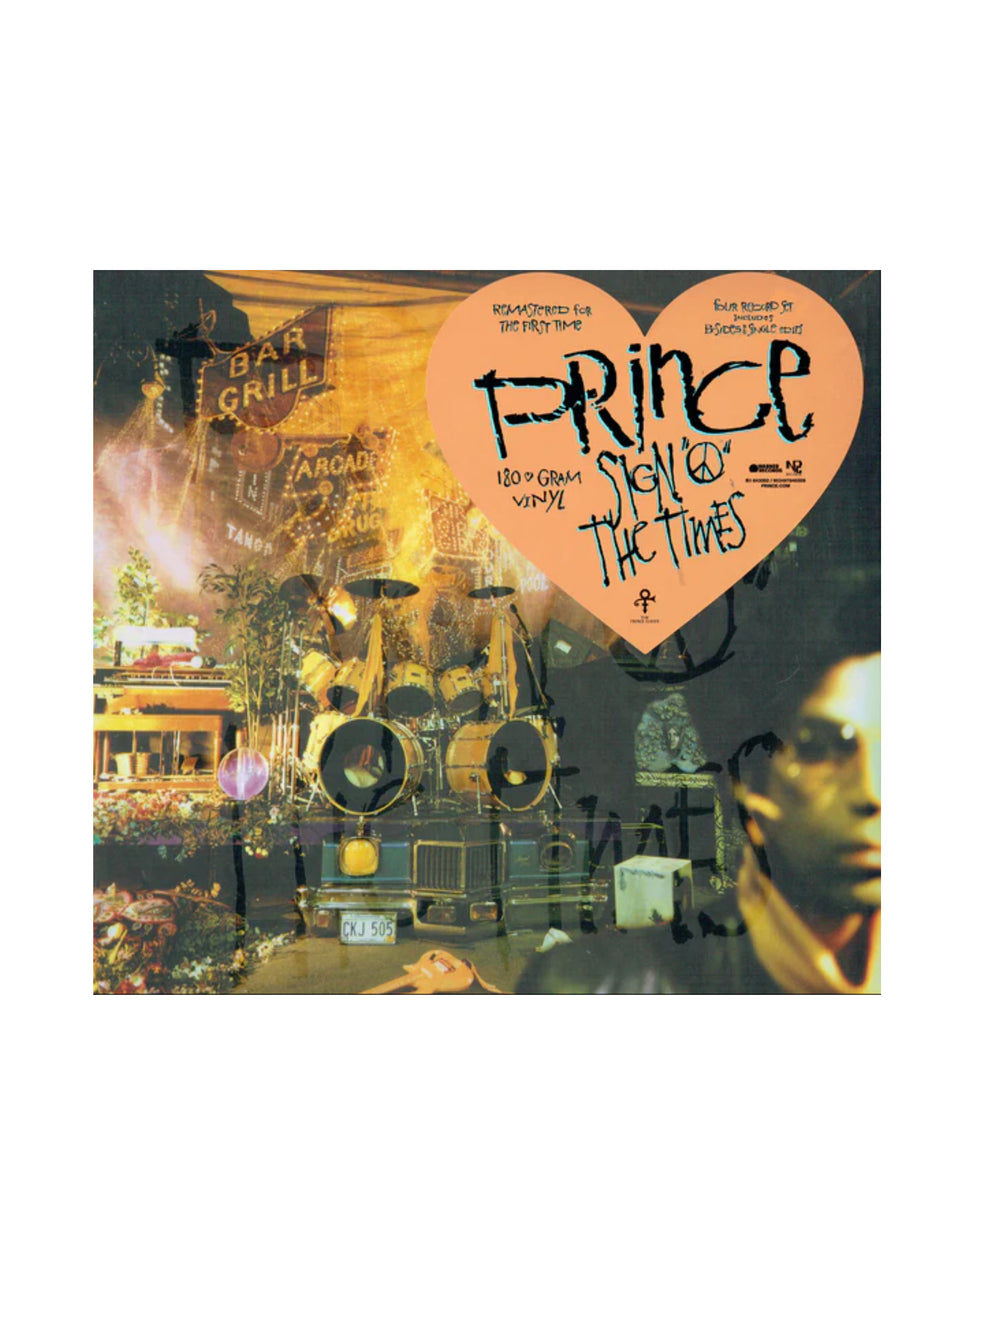 Prince – Sign O The Times Reissue RM  4 Vinyl LP Set B Sides & Edits NEW 2020